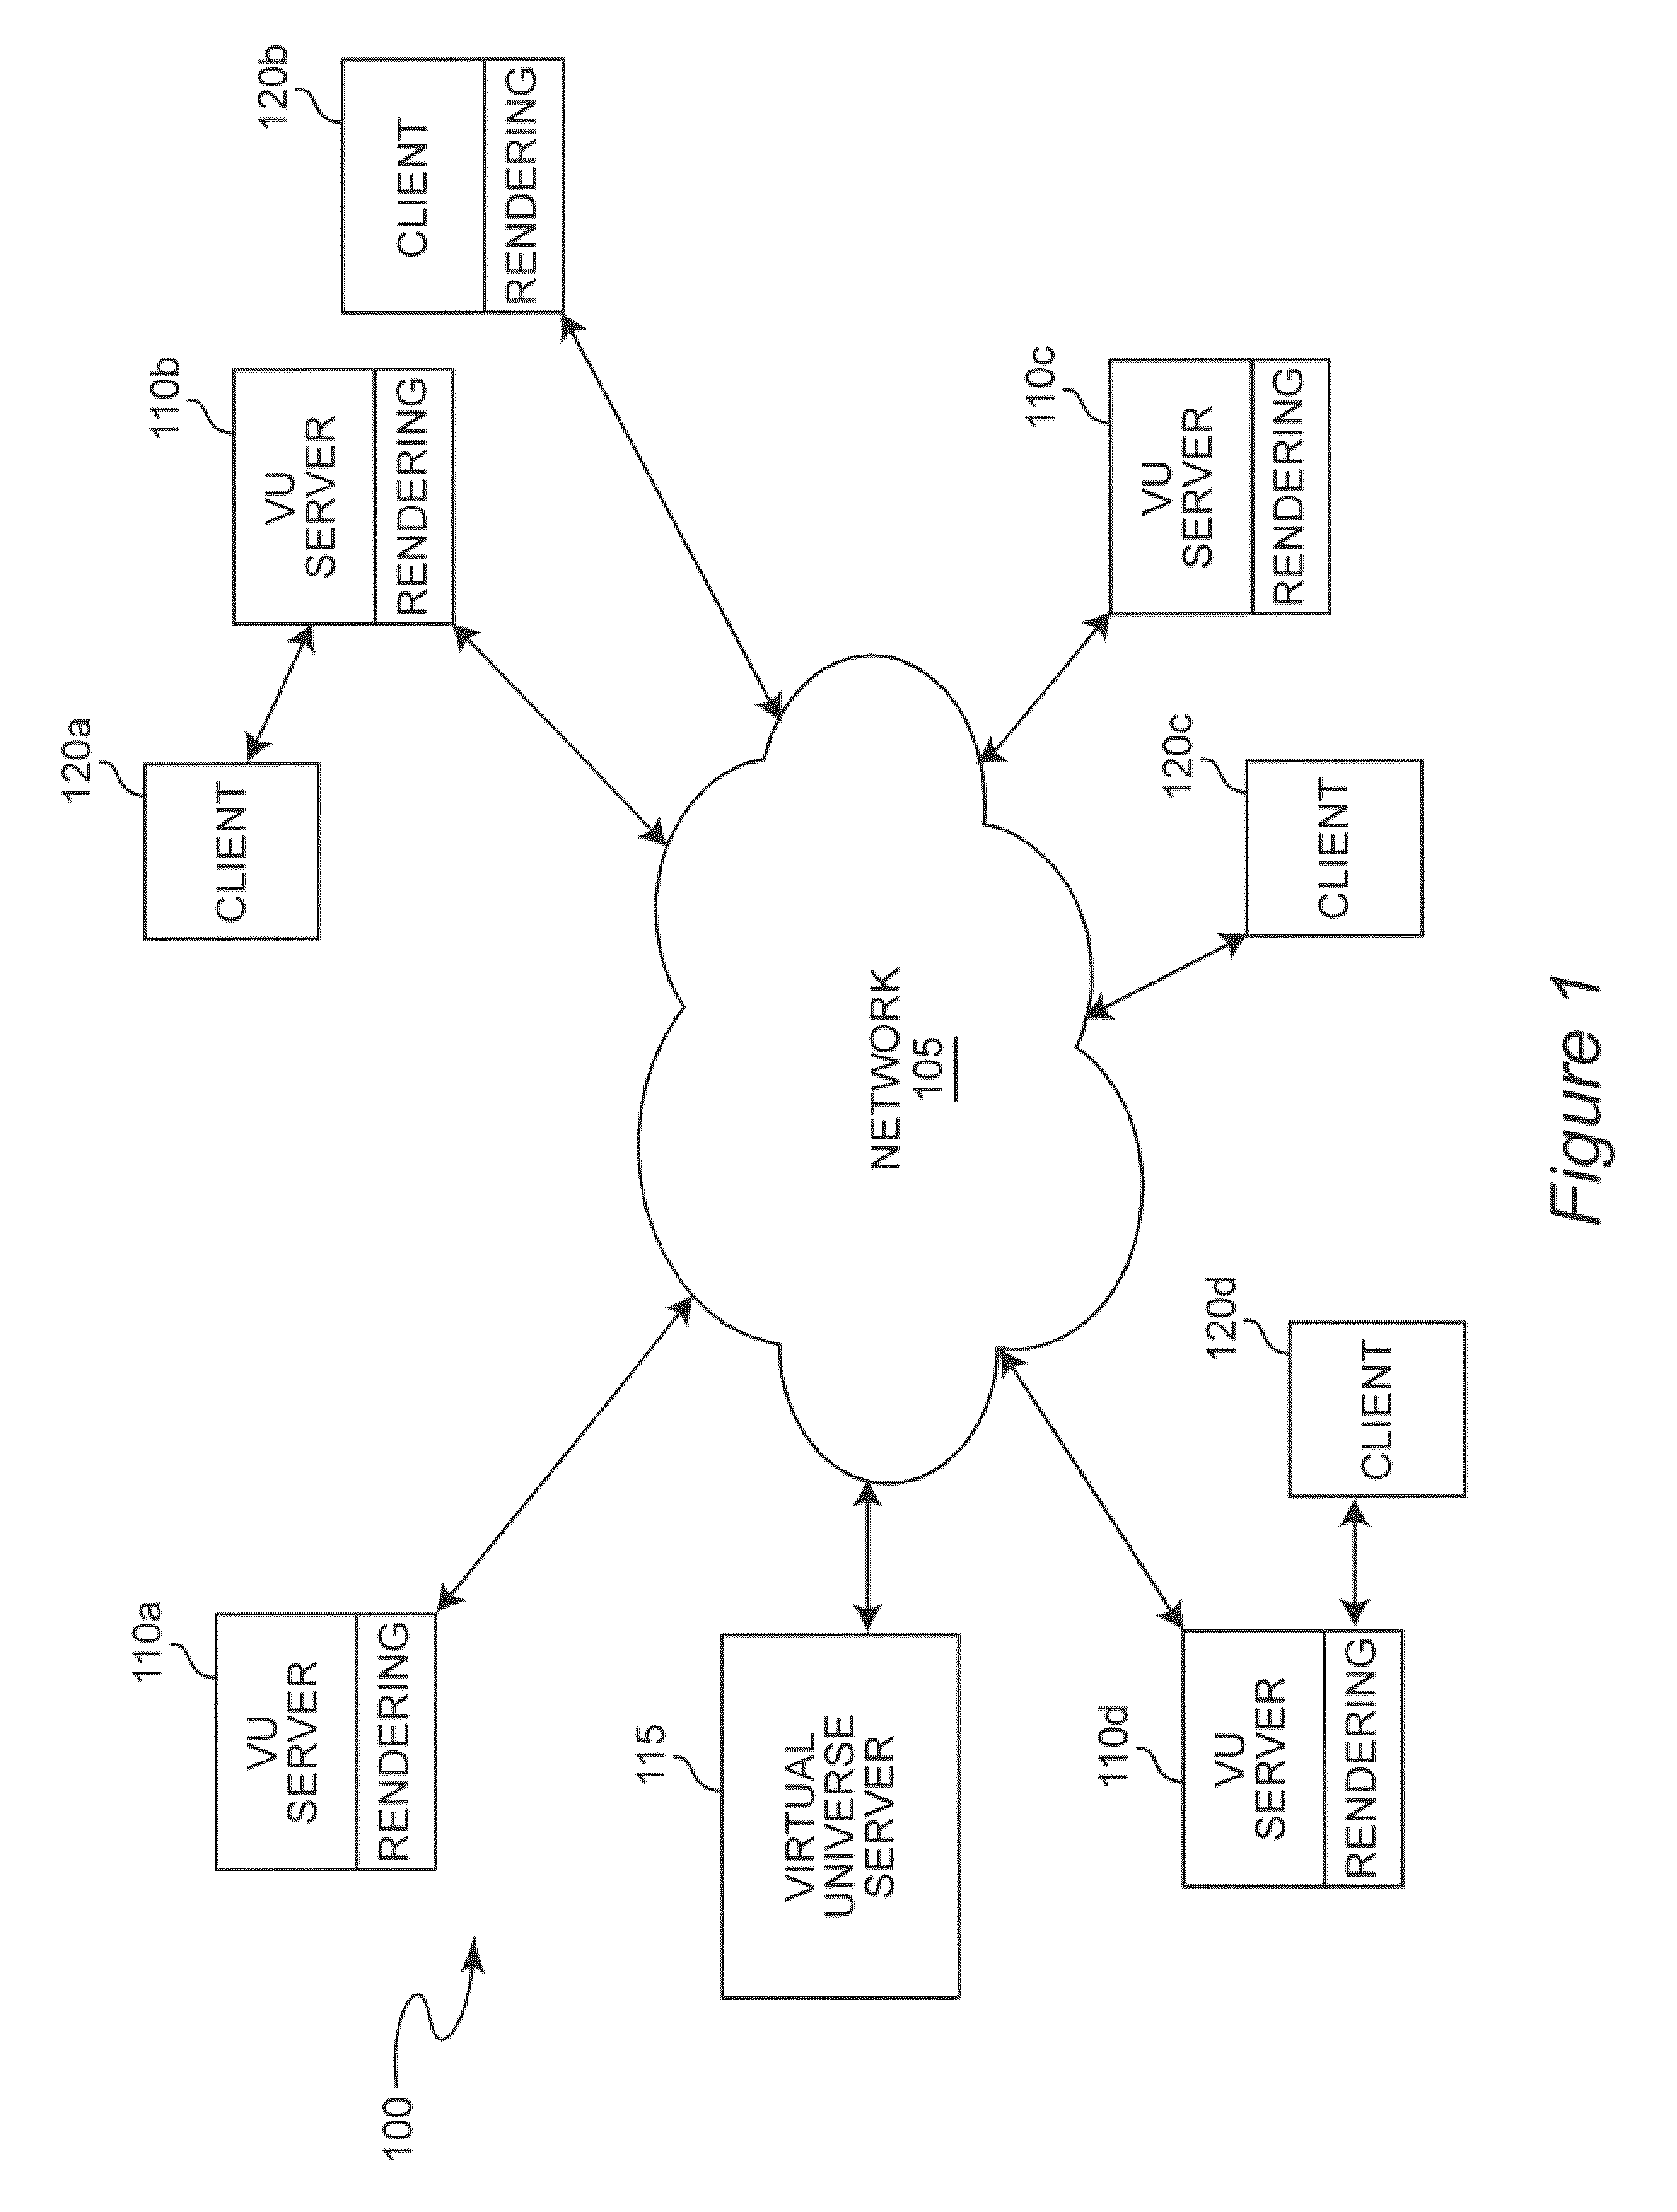 Routing a teleportation request based on compatibility with user contexts